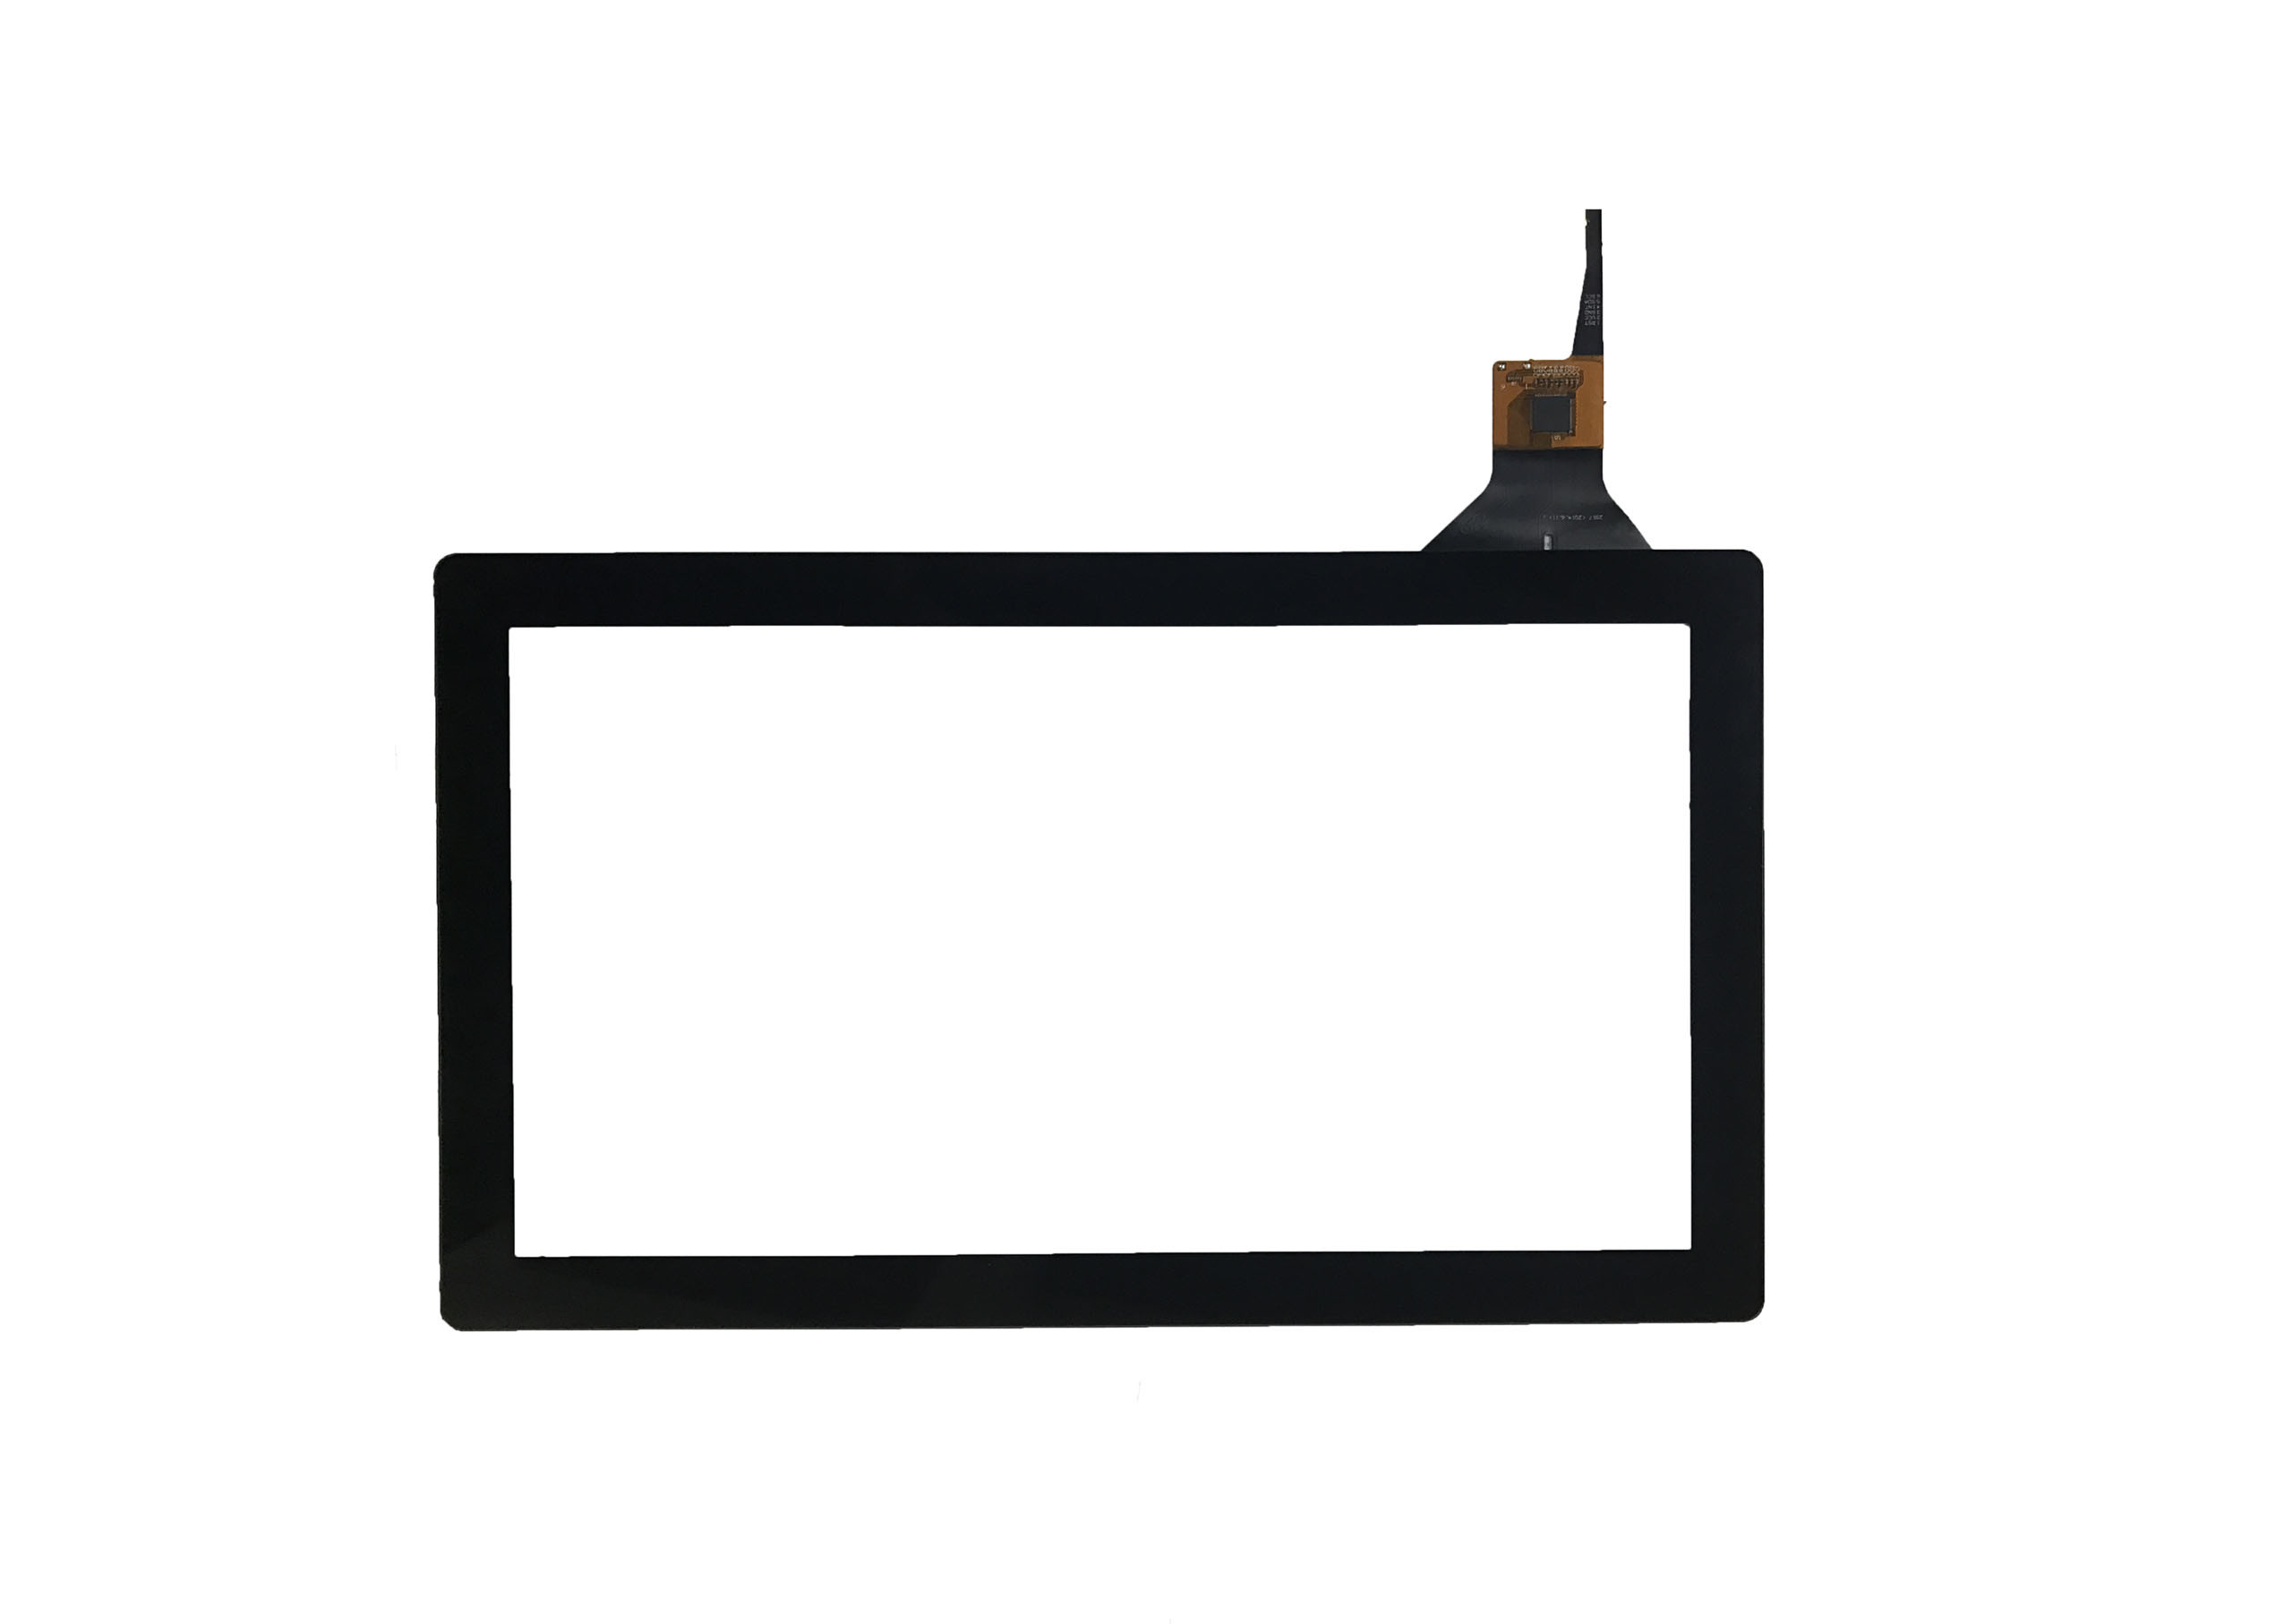 China 11.6 Inch Black Capacitive Touch Screen Panel For POS Terminal Dustproof High Precision Response Speed Long Lifespan factory